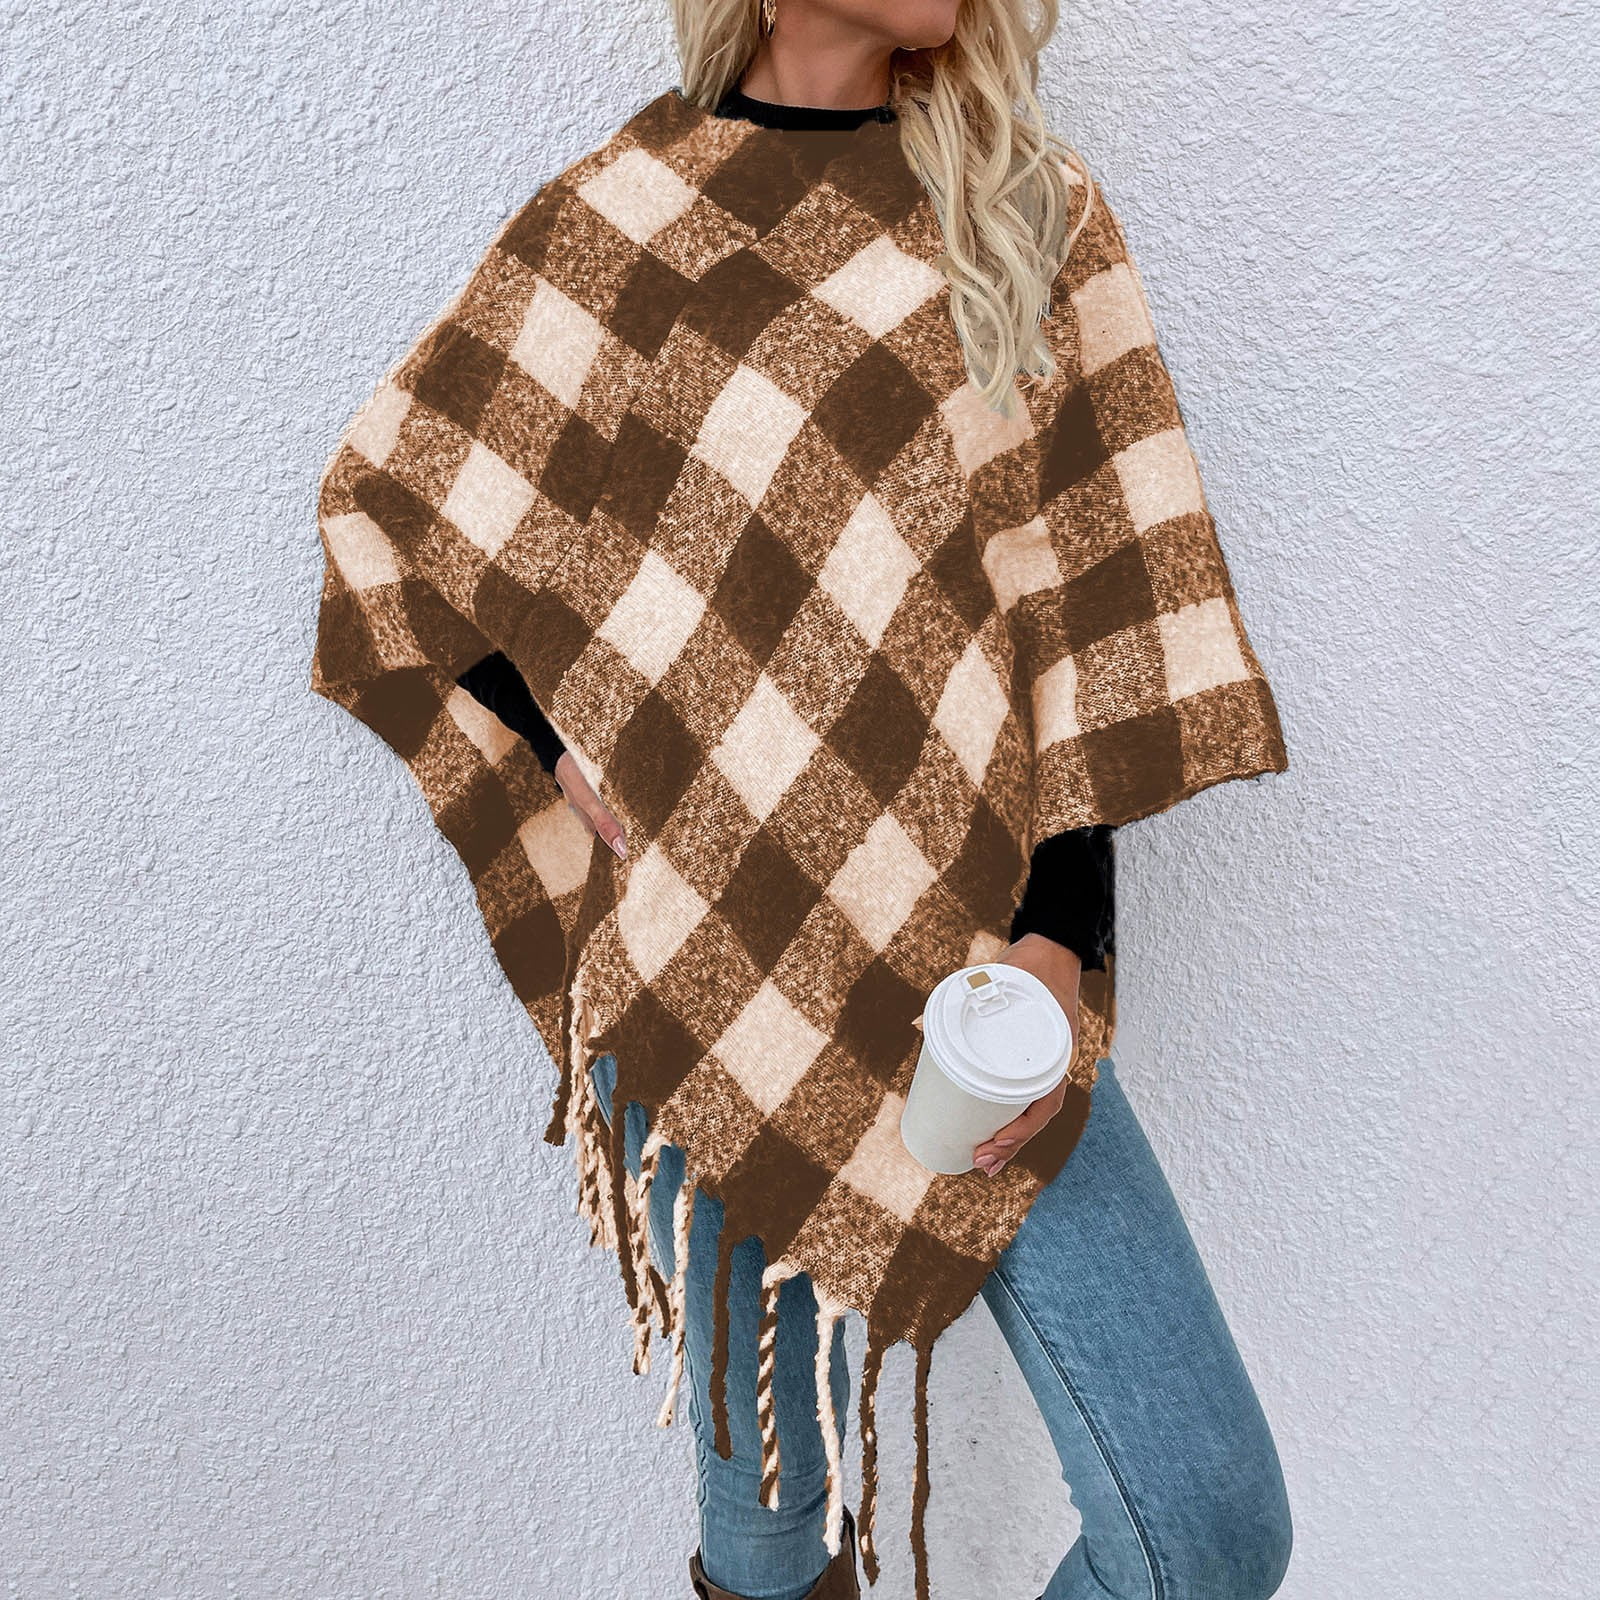 Shawl Pullover Sweater Front Cape Houndstooth Coat Fringe Sweater Fashion gvdentm Open Knit Cardigan WoWomen Jacket